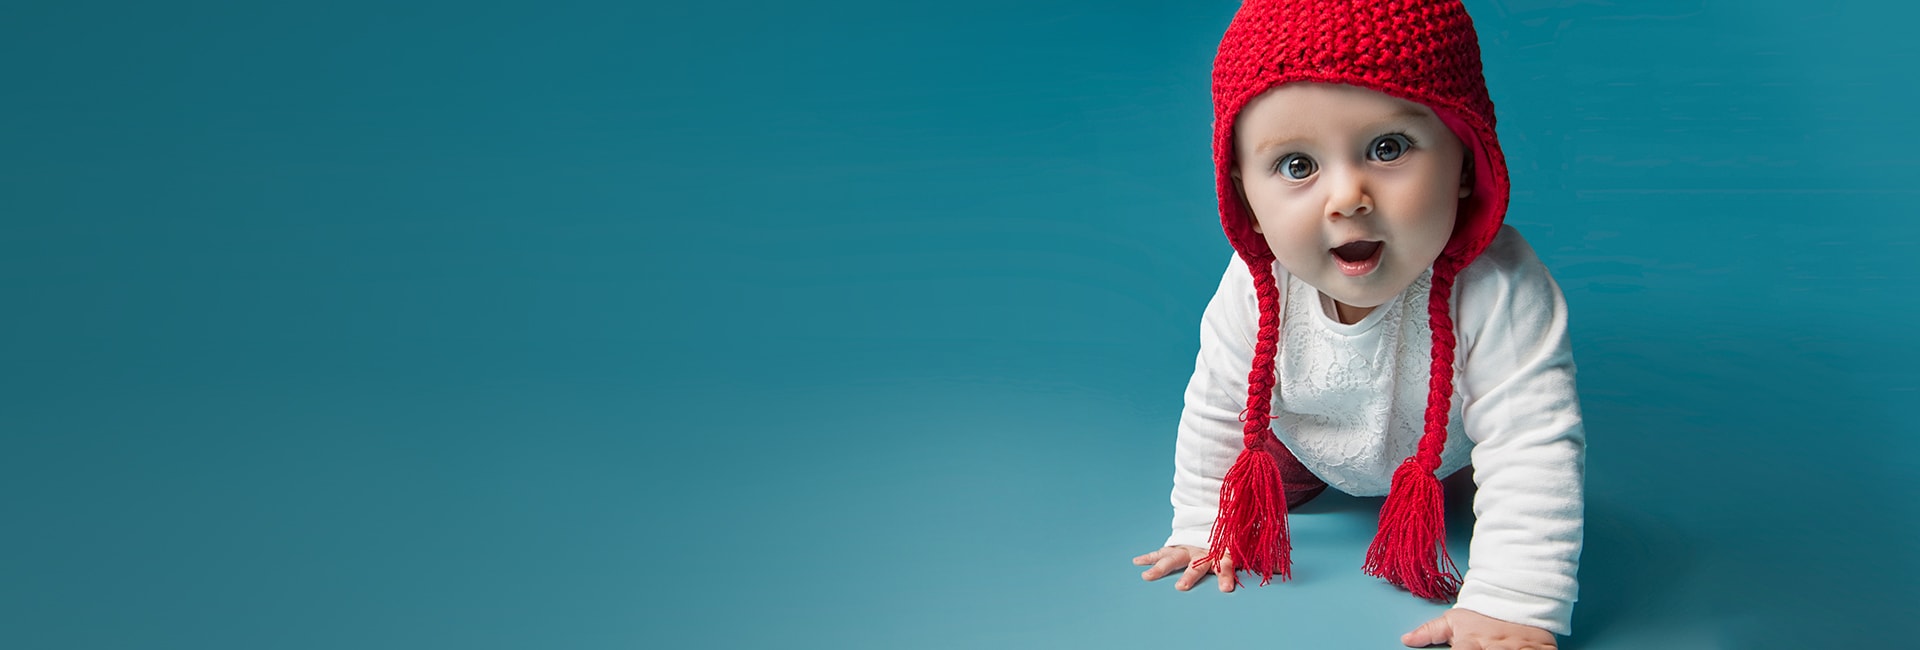 Photo of baby crawling with a red hat on